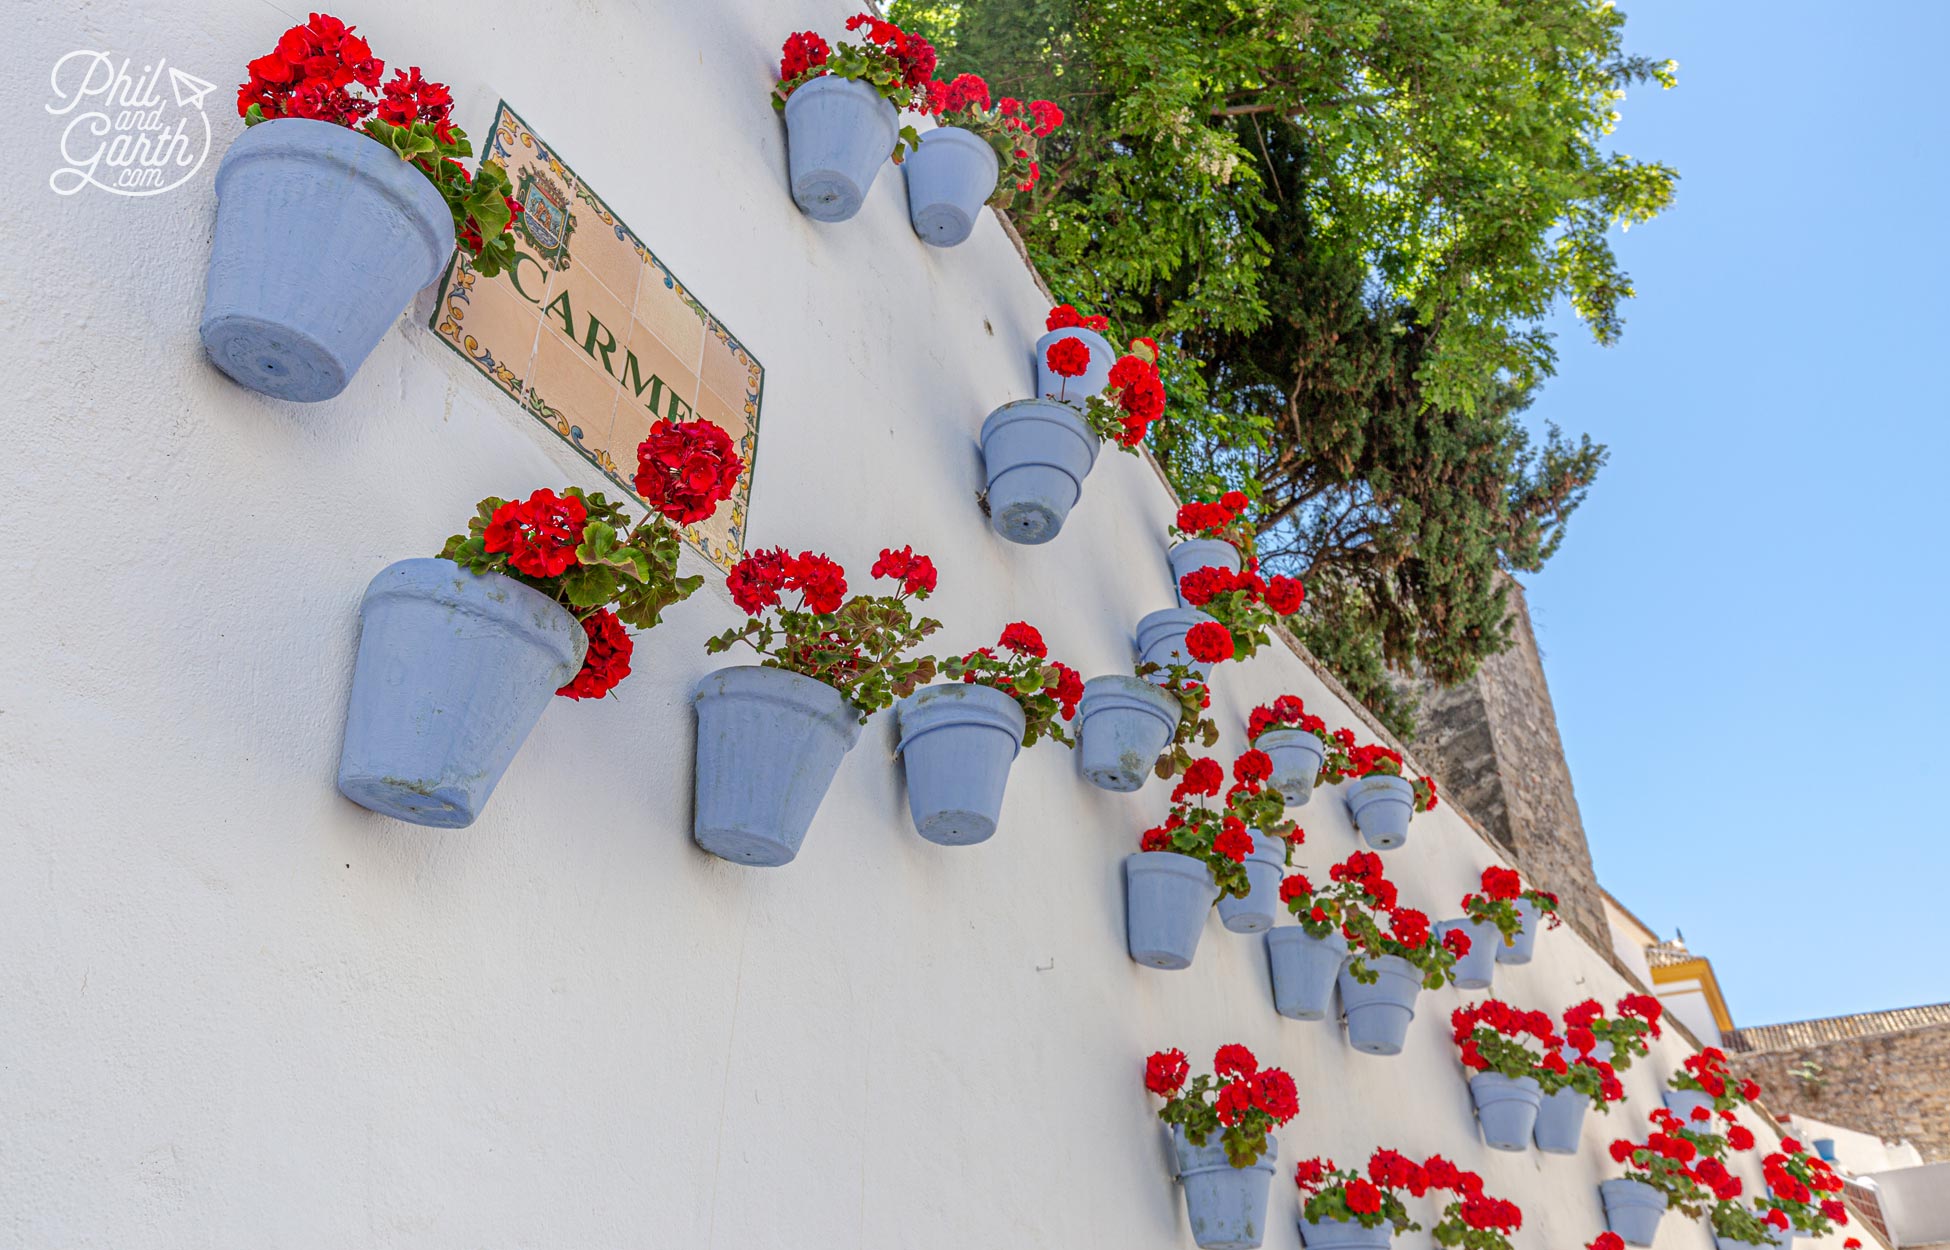 You'll find plenty of colourful flower pots decorating walls on small streets like 'Carmen'